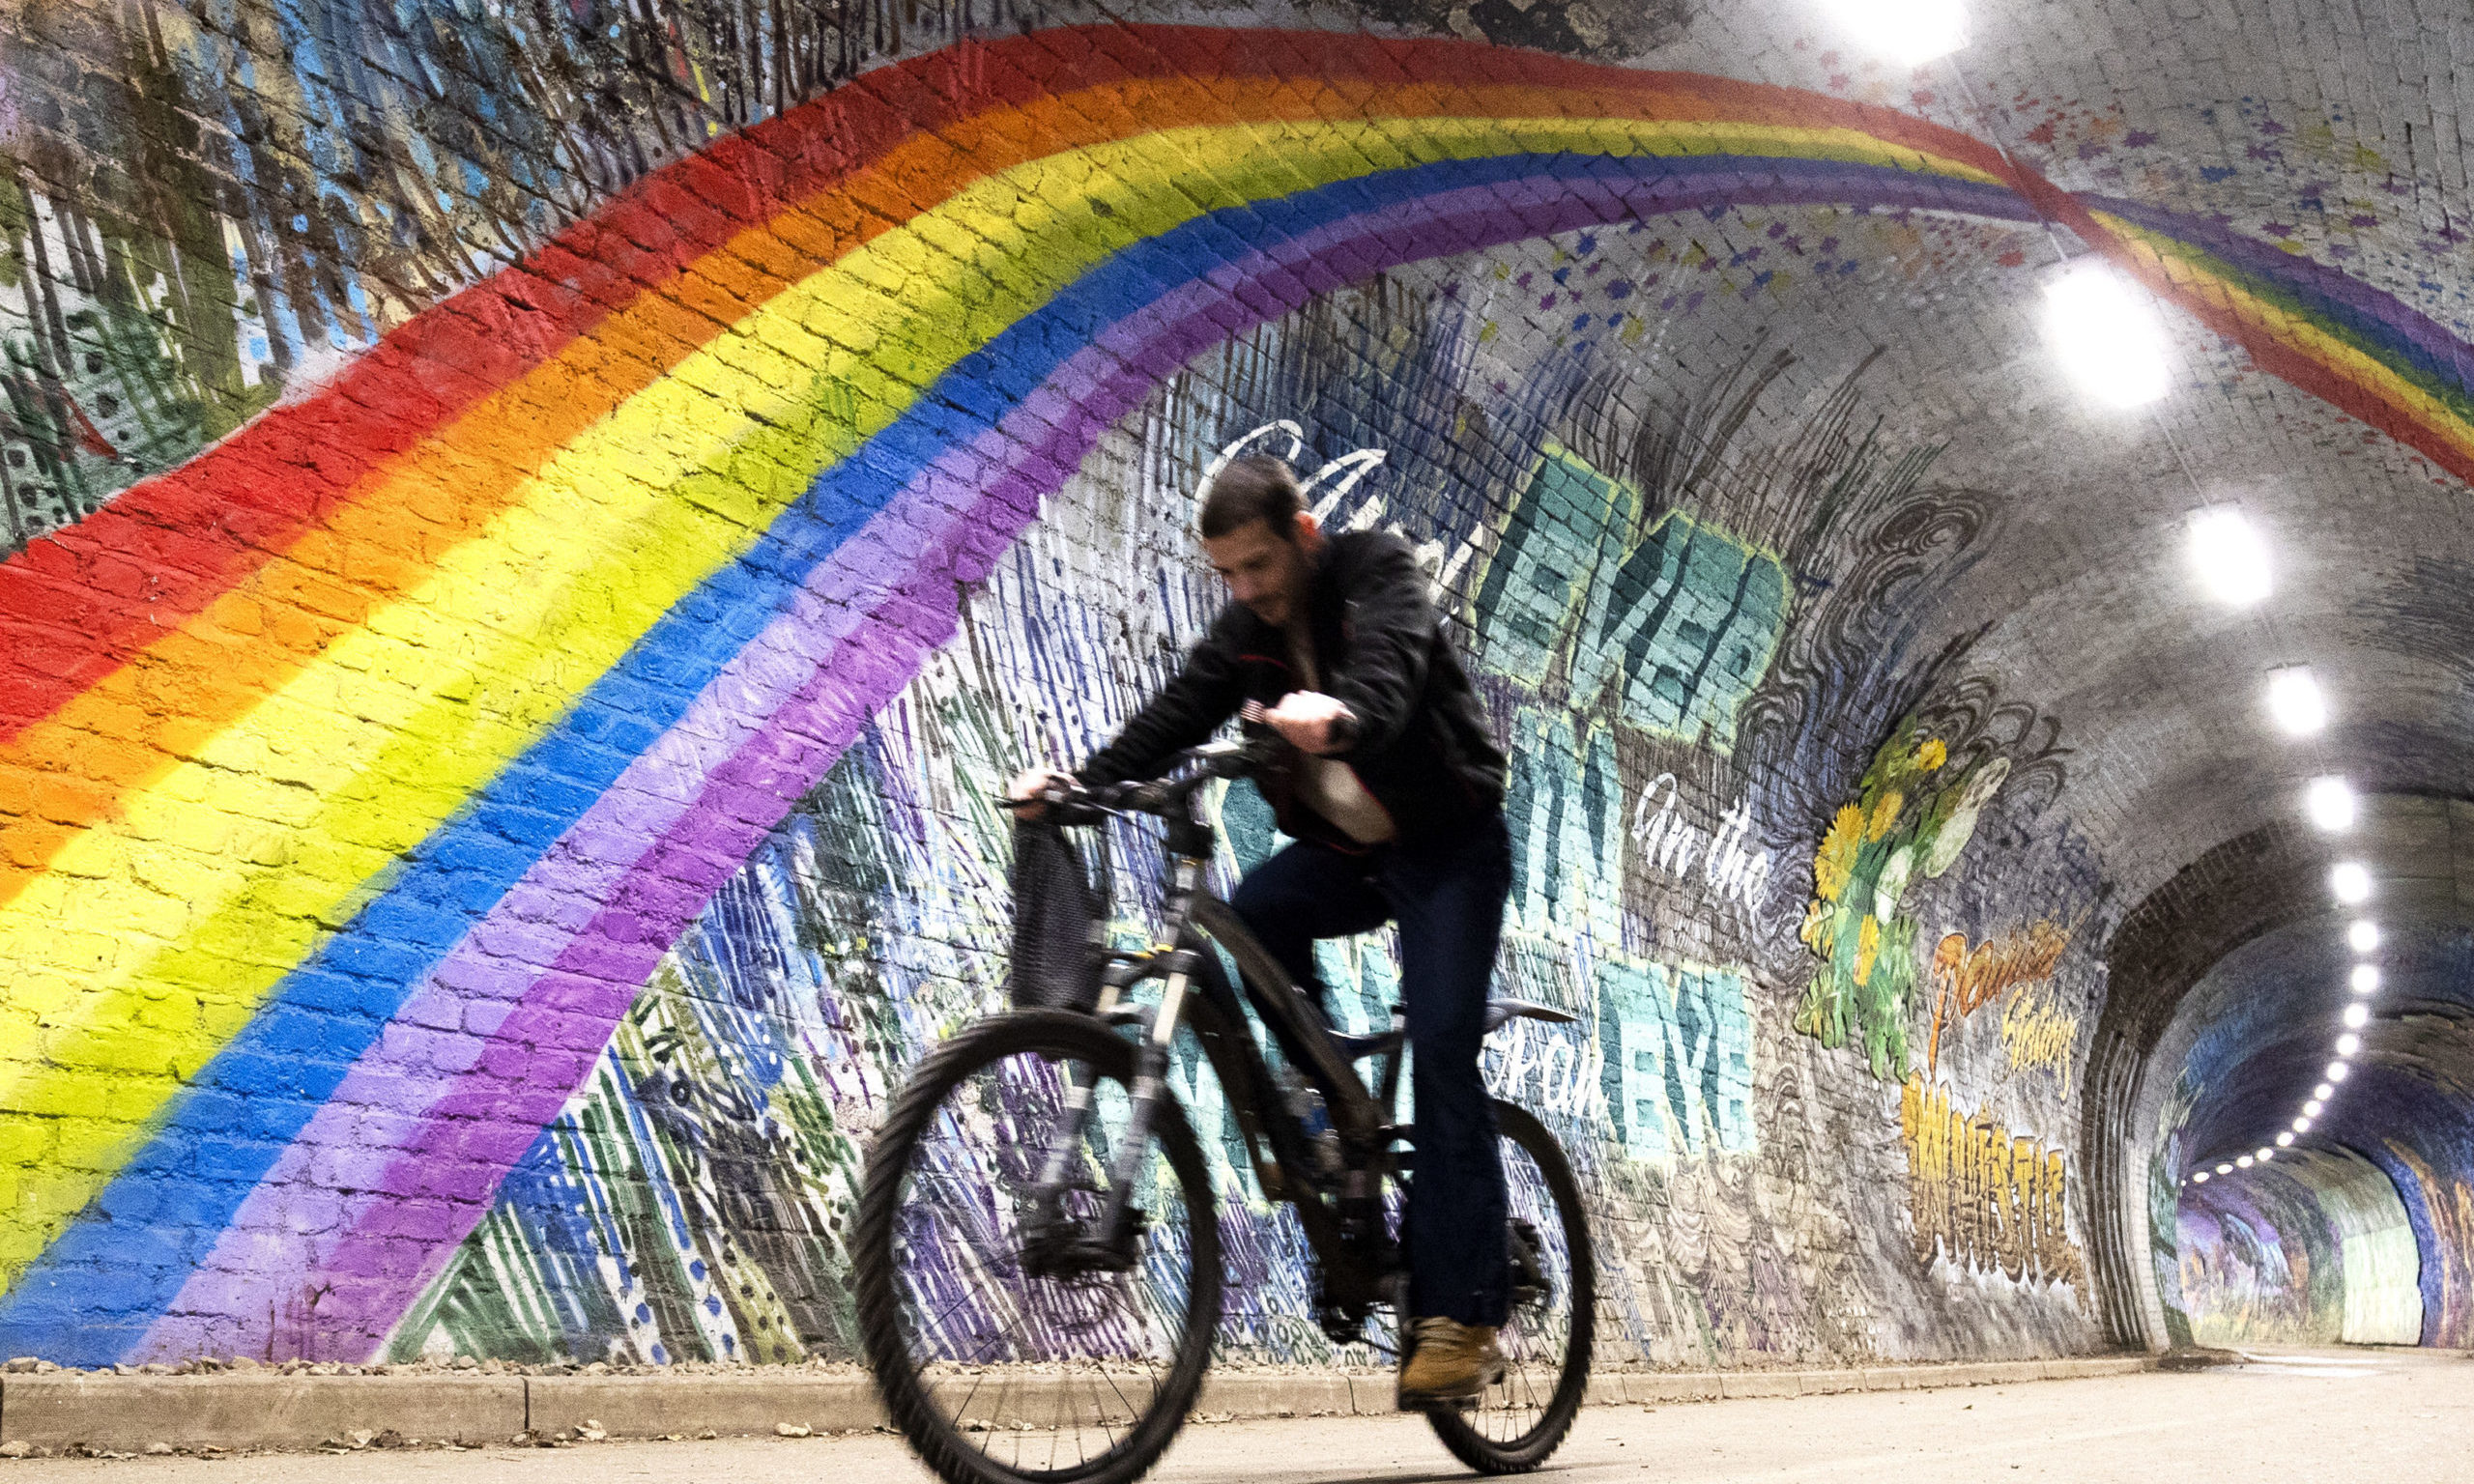 A cyclist passes underneath the rainbow mural in Colinton Tunnel, Edinburgh, as the UK continues in lockdown to help curb the spread of the coronavirus. PA Photo. Picture date: Tuesday April 21, 2020. See PA story HEALTH Coronavirus. Photo credit should read: Jane Barlow/PA Wire